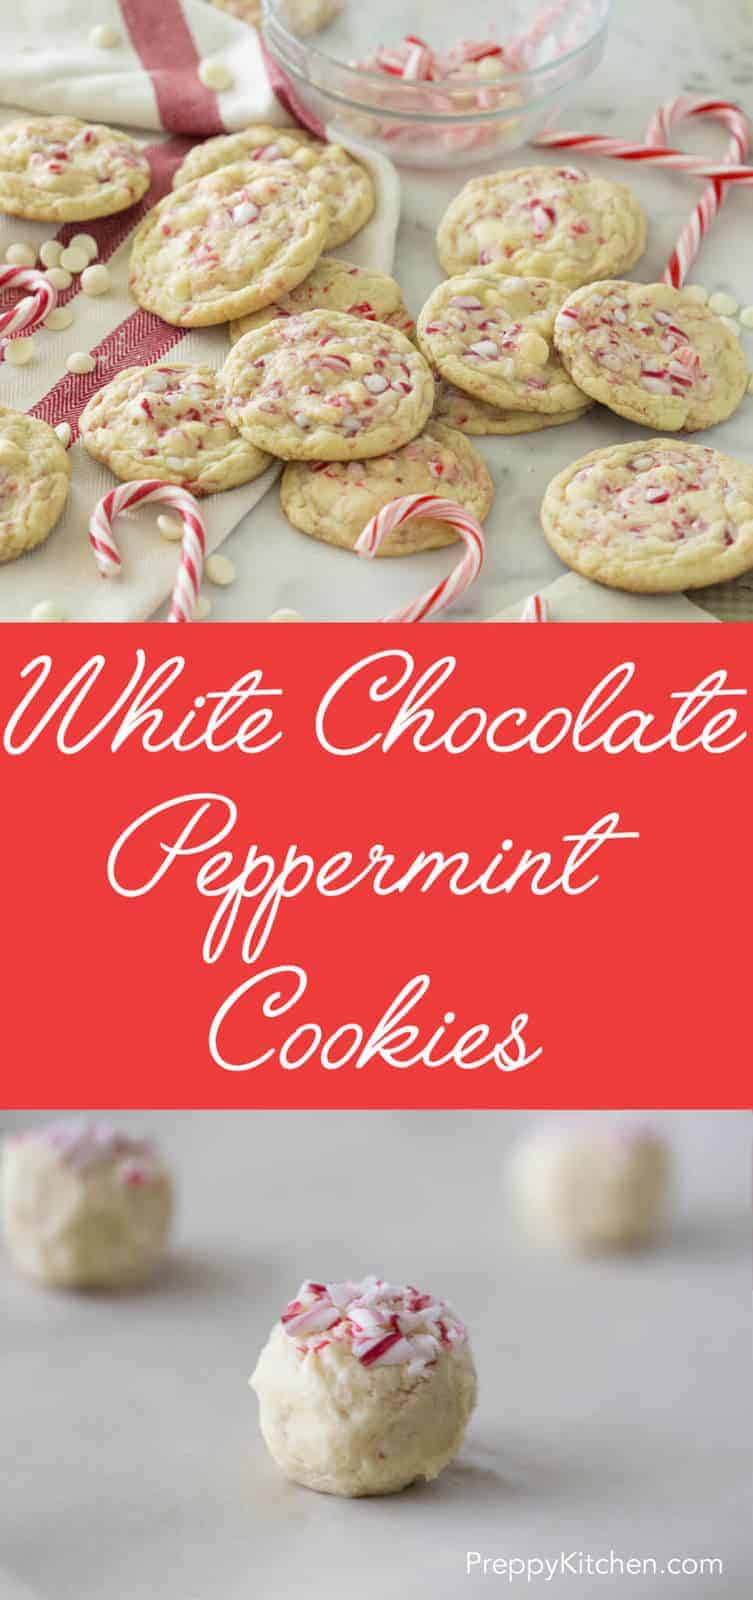 White Chocolate Peppermint Cookies - Preppy Kitchen